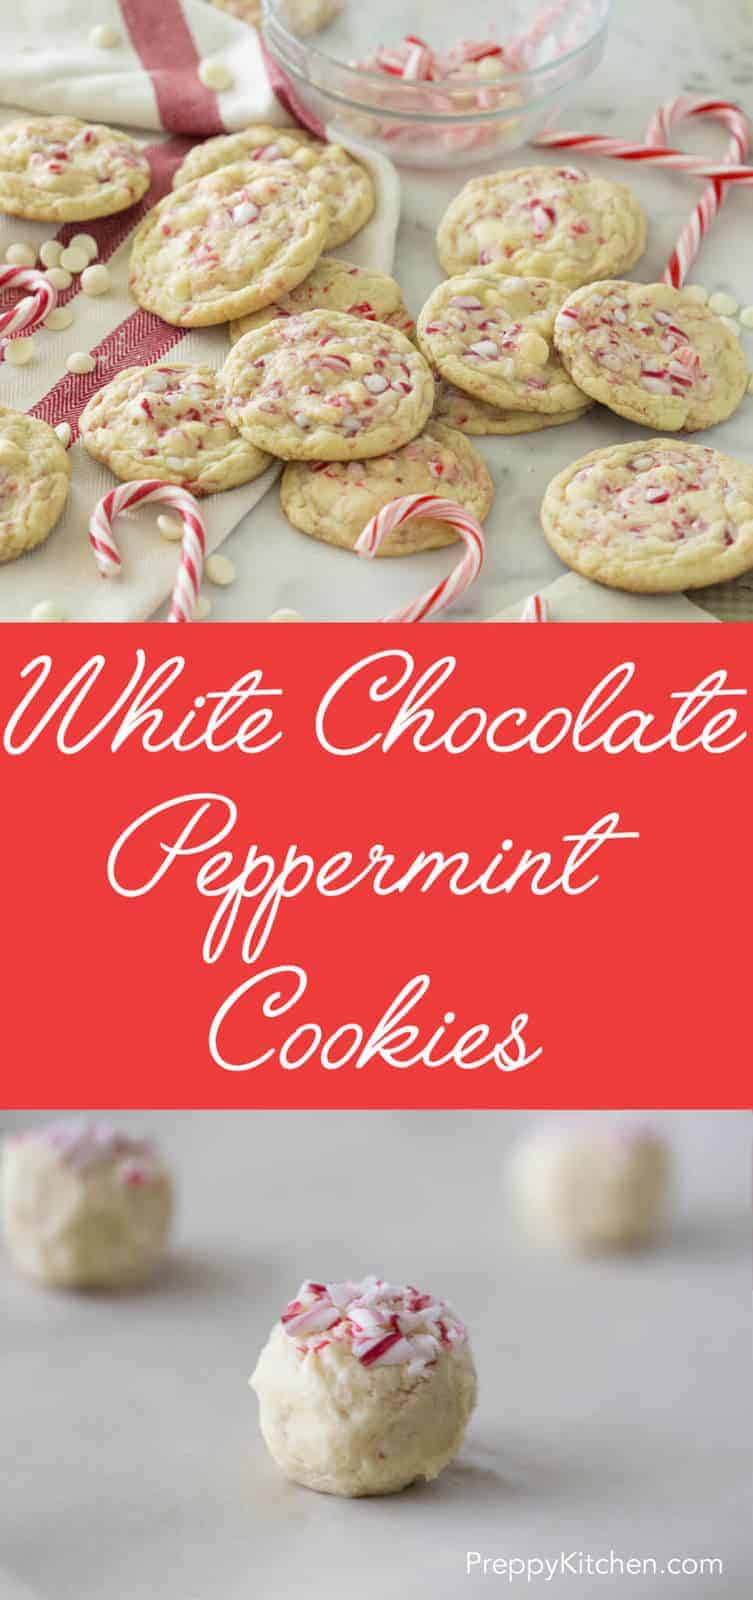 White Chocolate Peppermint Cookies - Preppy Kitchen